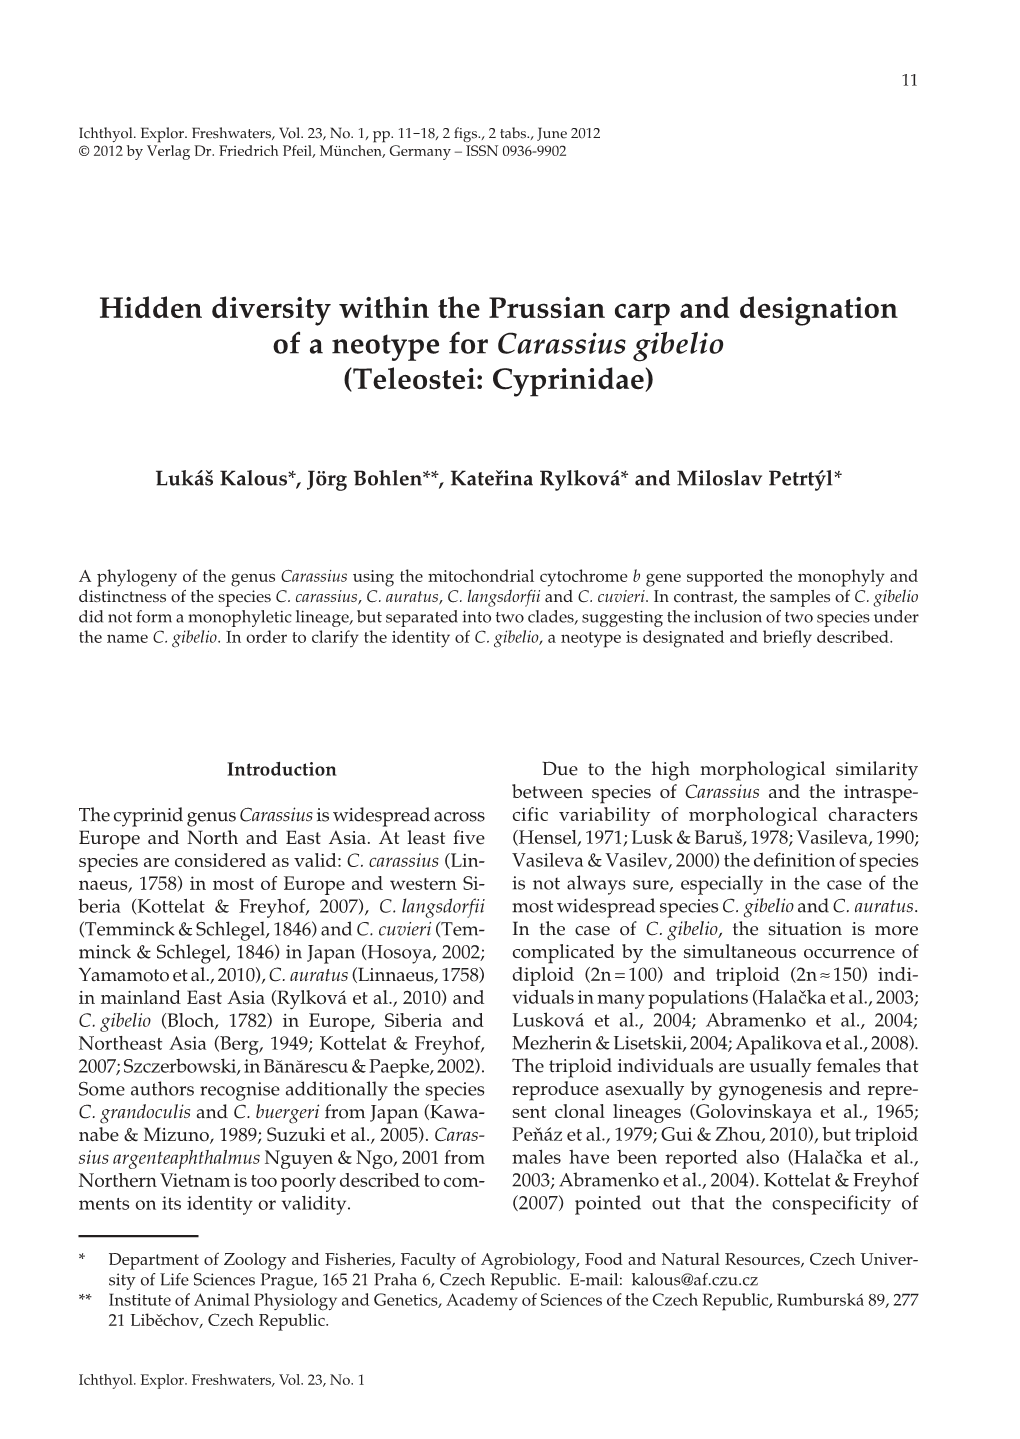 Hidden Diversity Within the Prussian Carp and Designation of a Neotype for Carassius Gibelio (Teleostei: Cyprinidae)